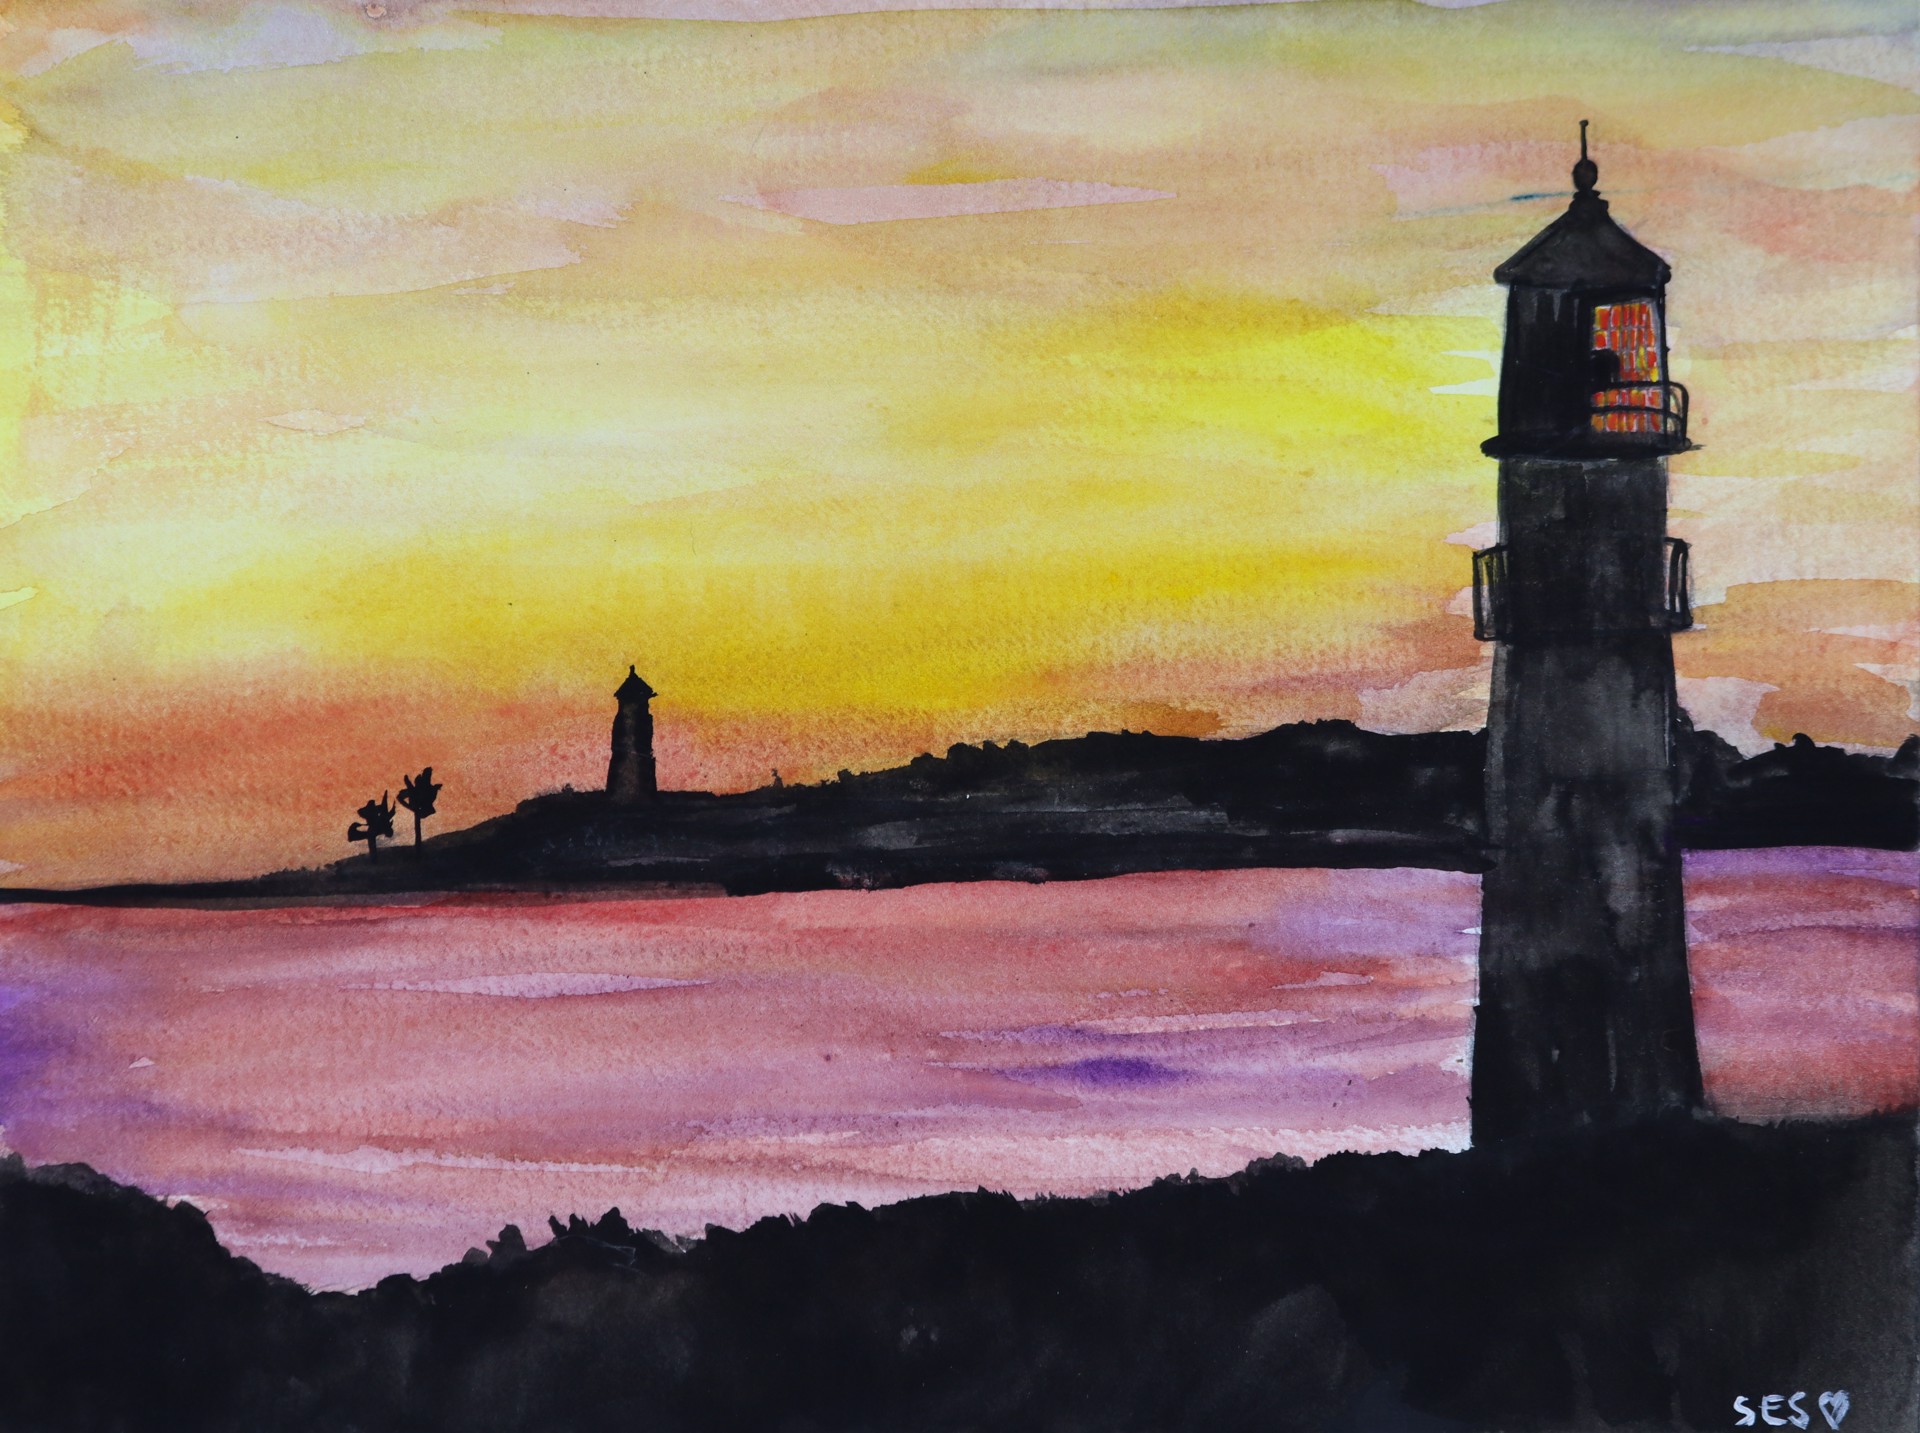 Sunset by the Lighthouse by Sarah Swan